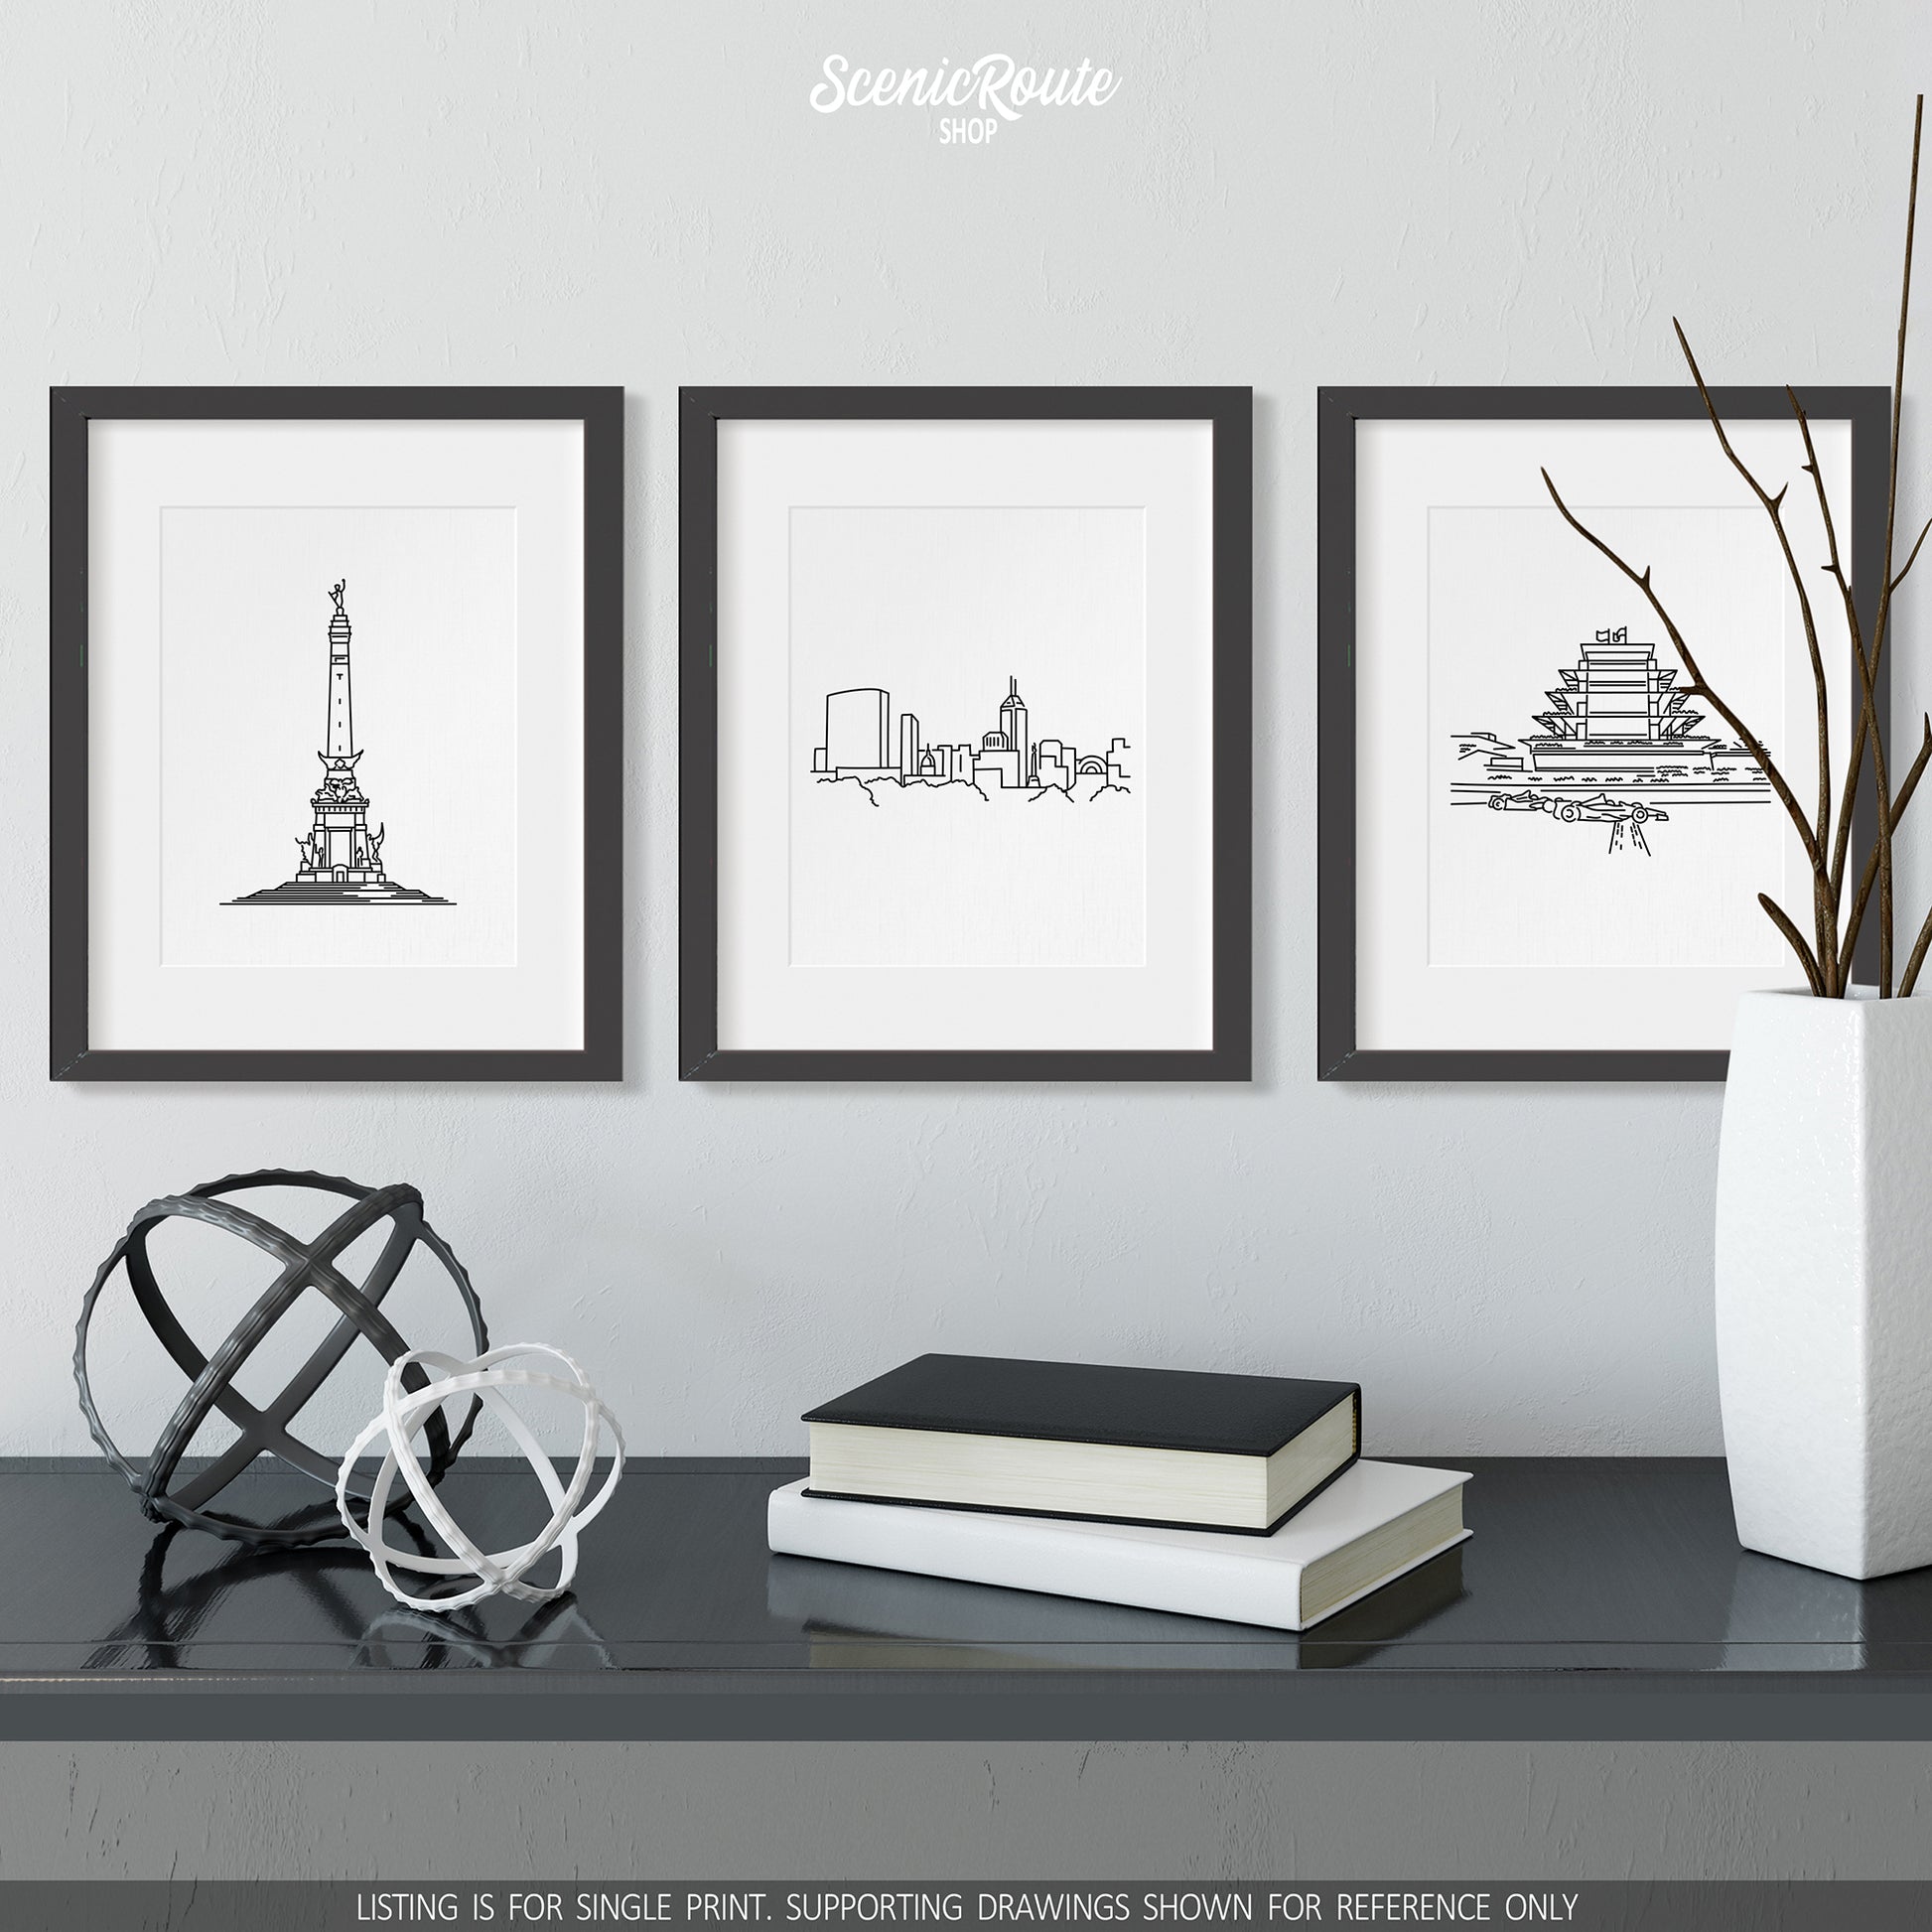 A group of three framed drawings on a wall above a dresser with books and figurines. The line art drawings include the Soldiers and Sailors Monument, Indianapolis Skyline, and Speedway Pagoda